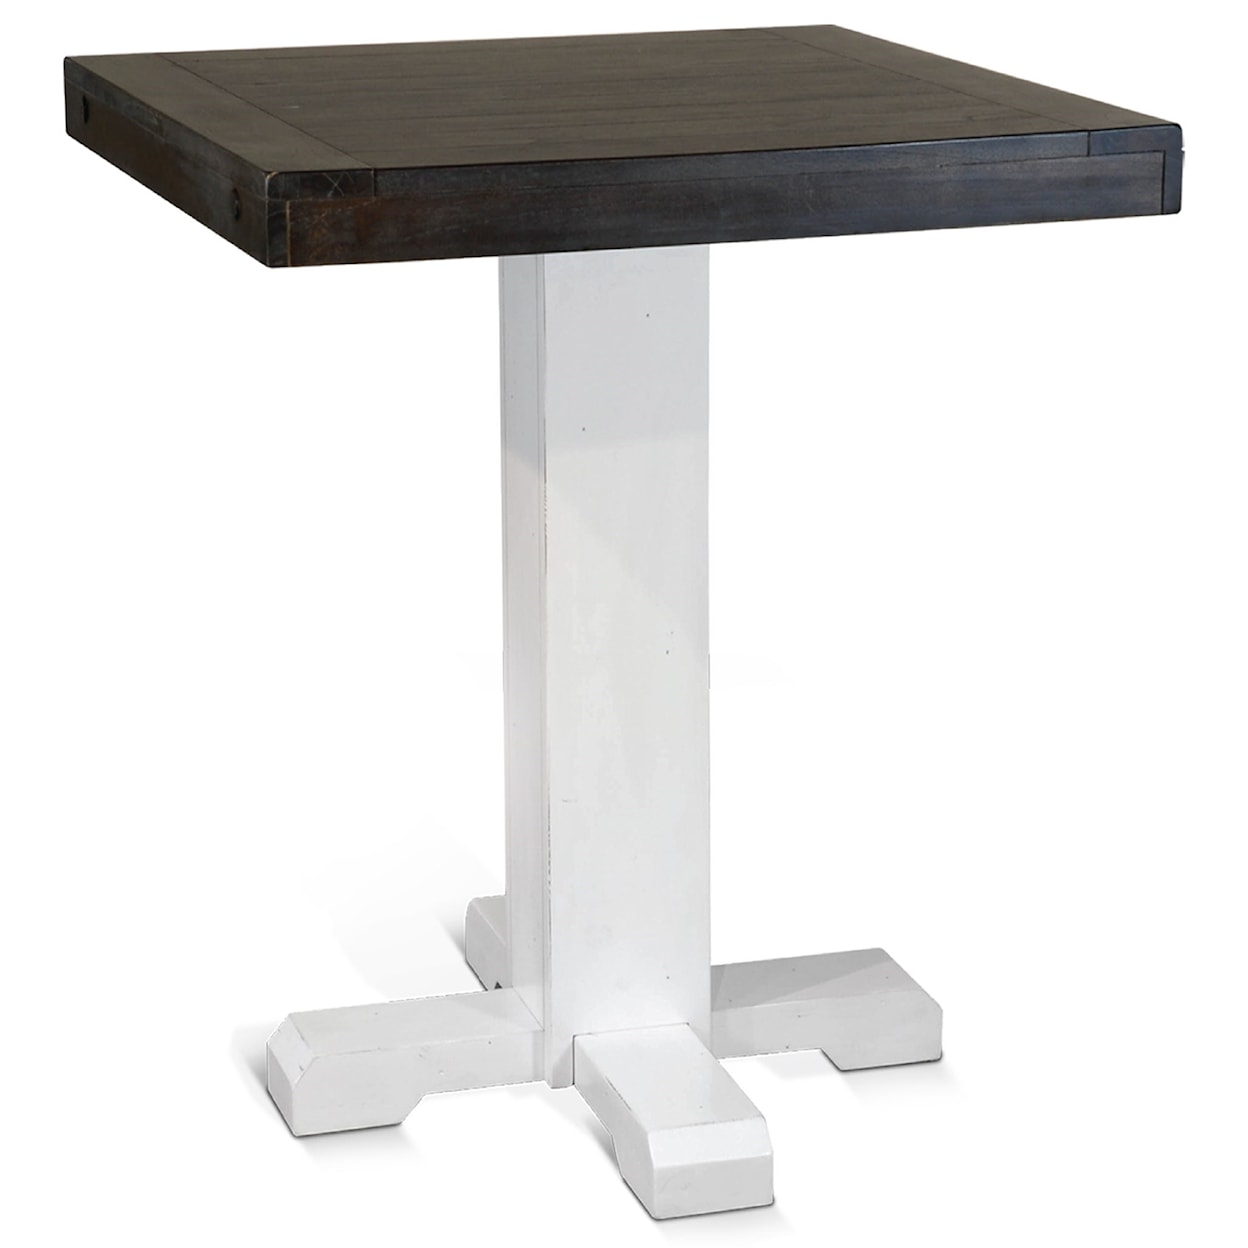 Sunny Designs Carriage House Pub Table